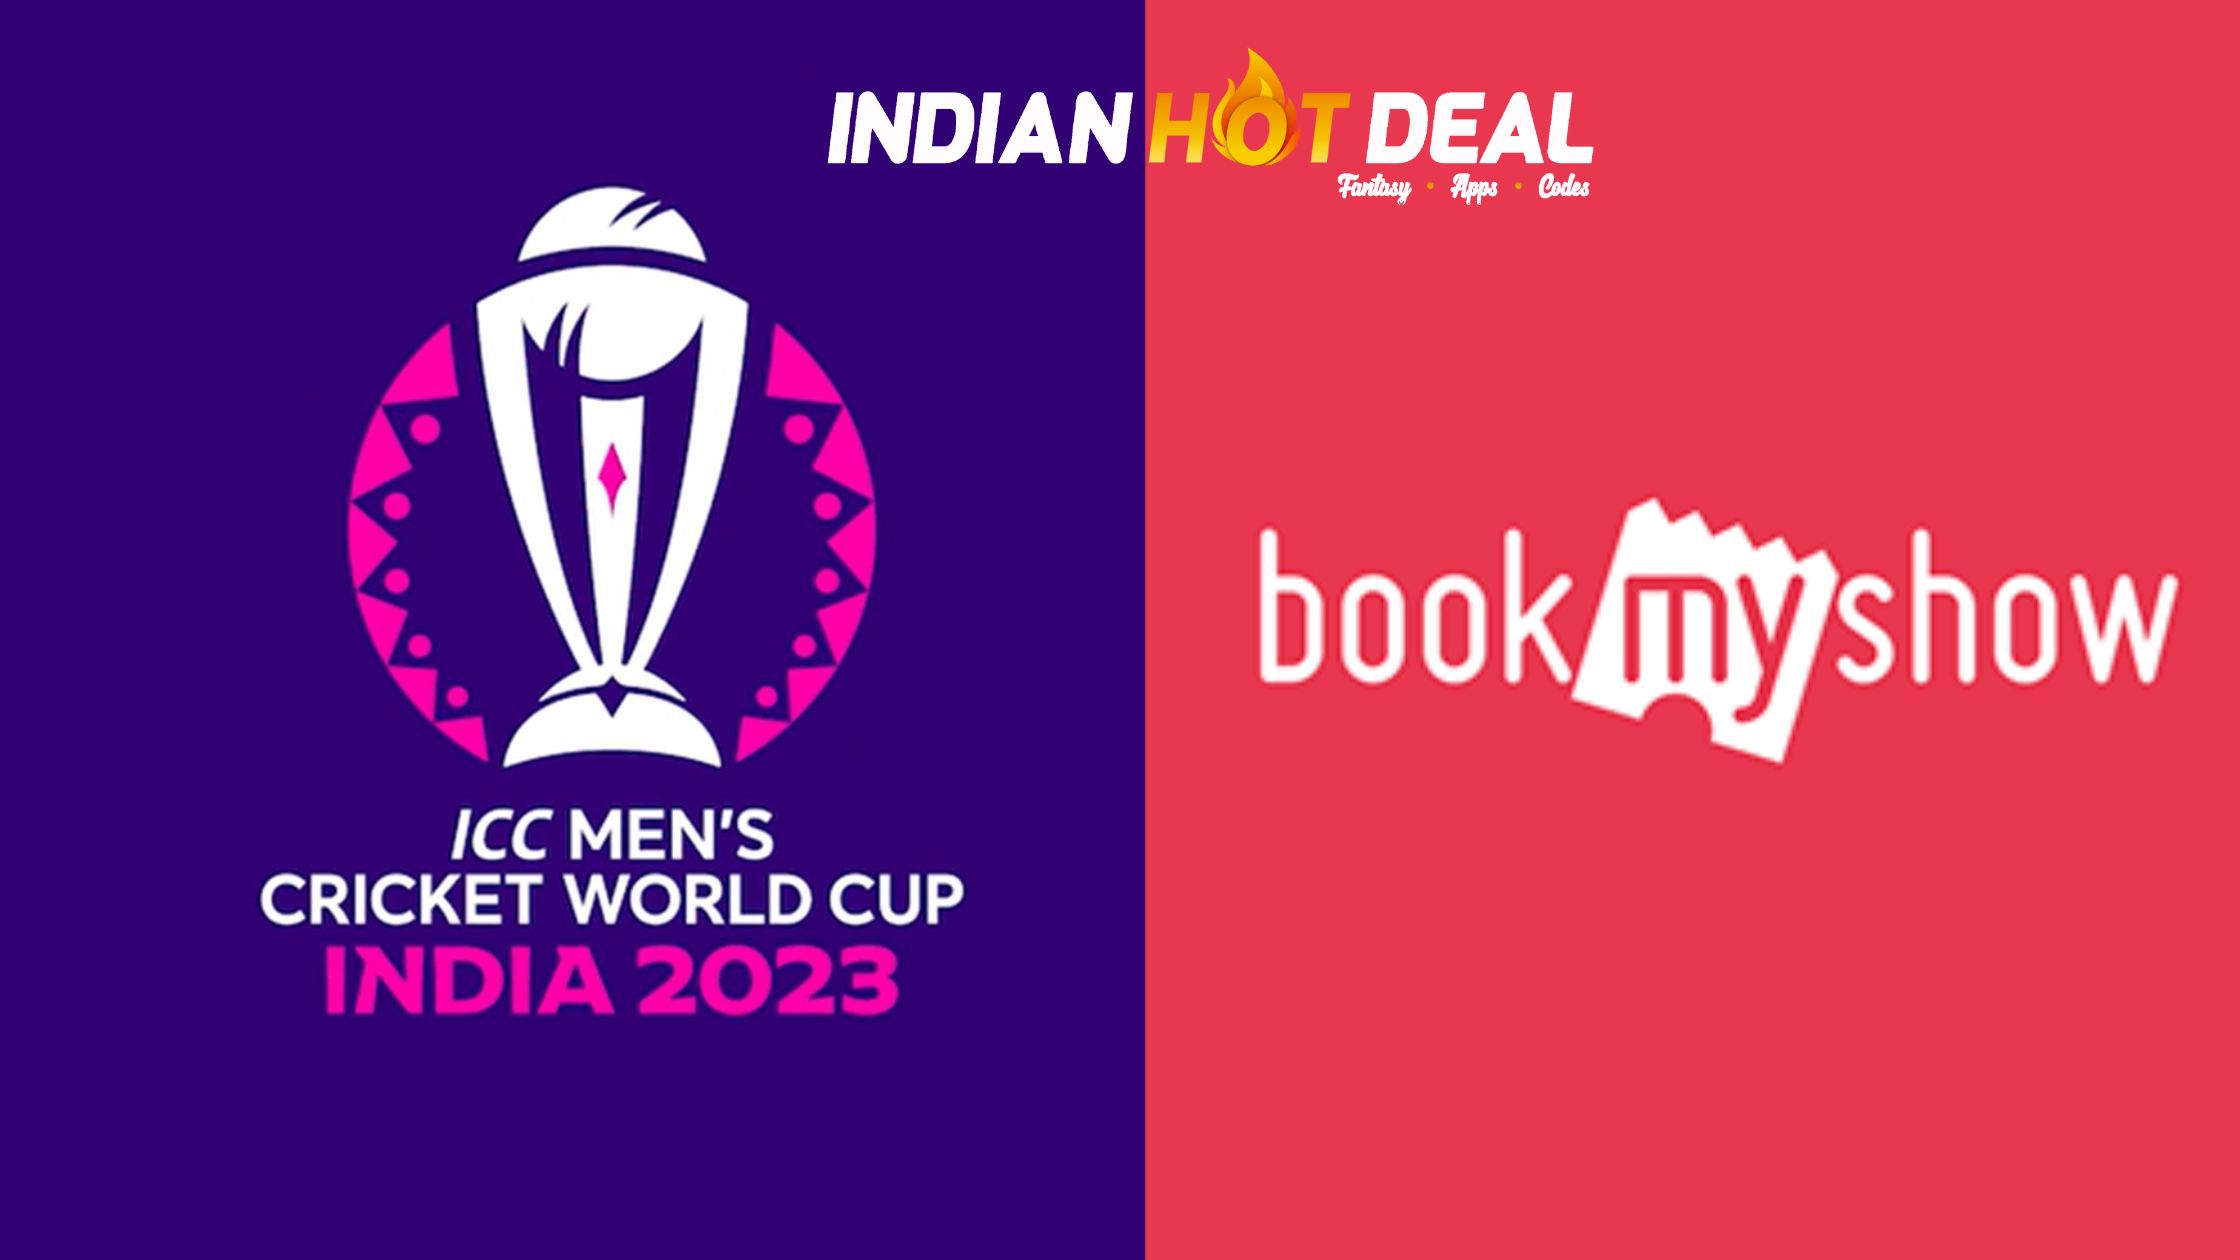 BCCI Announces BookMyShow As Official Ticketing Partner for ICC Men's Cricket World Cup 2023.